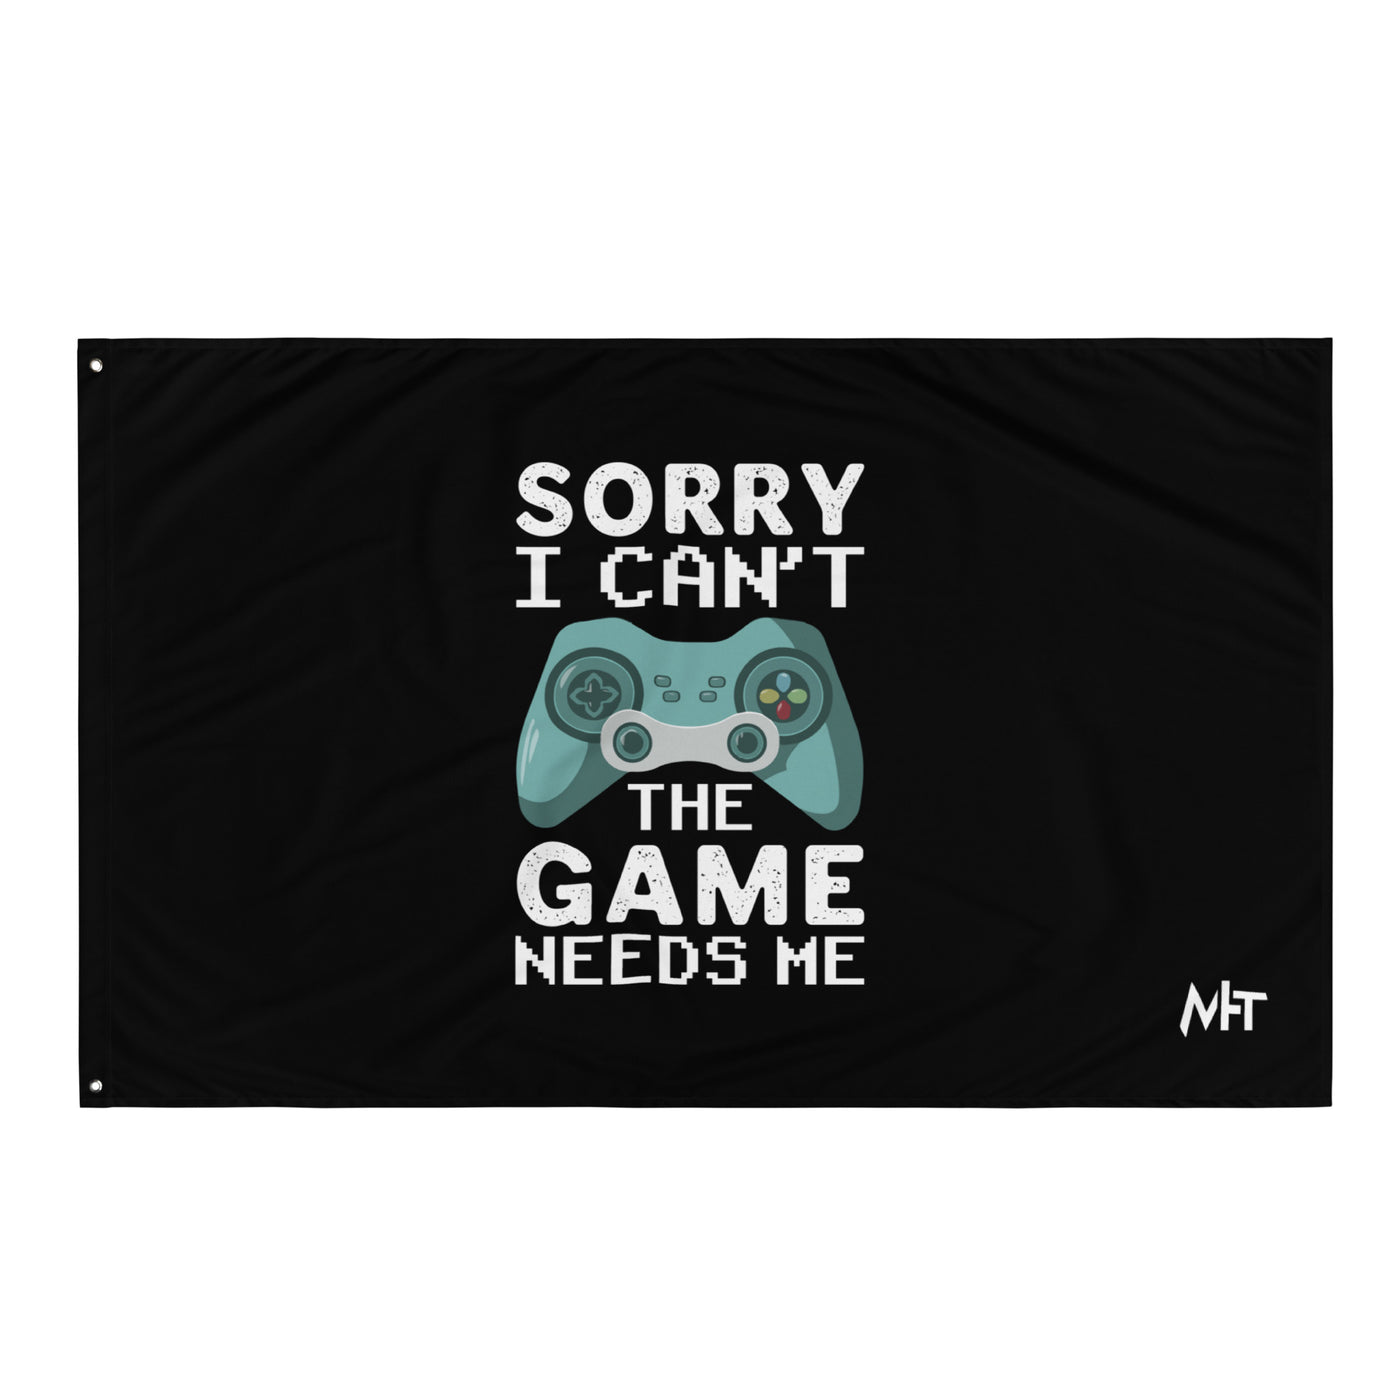 Sorry! I can't, The Game needs me - Flag